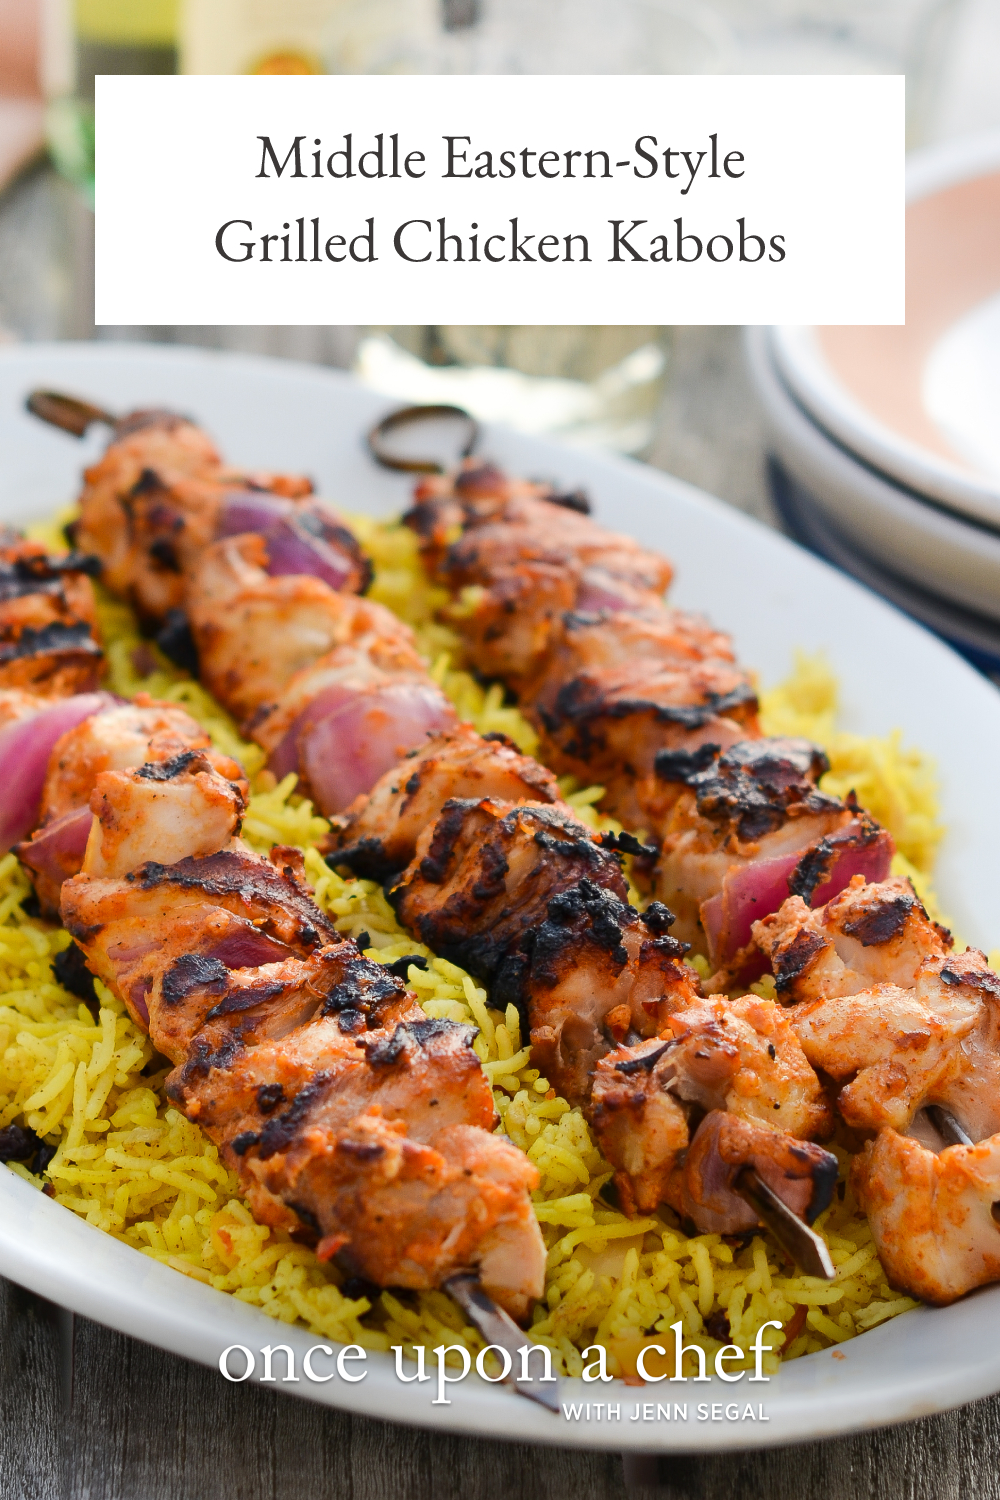 Middle Eastern-Style Grilled Chicken Kabobs - Once Upon a Chef